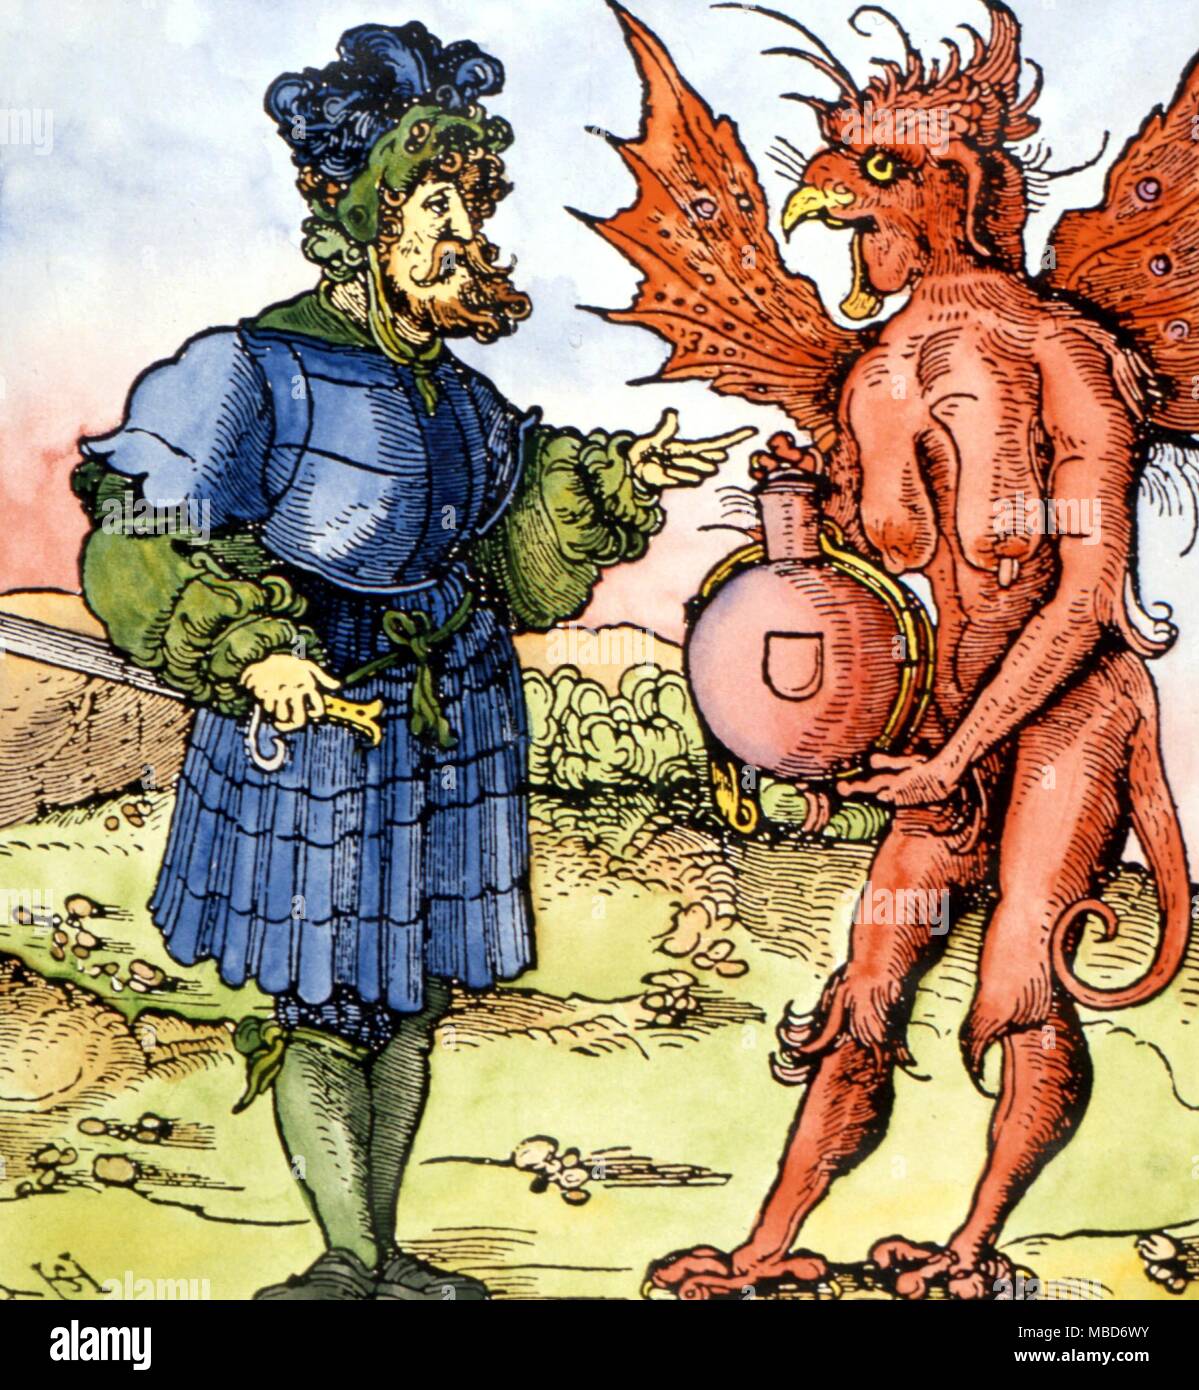 Bird-headed demon confronting a German knight - Fifteenth century German woodcut by HS Stock Photo